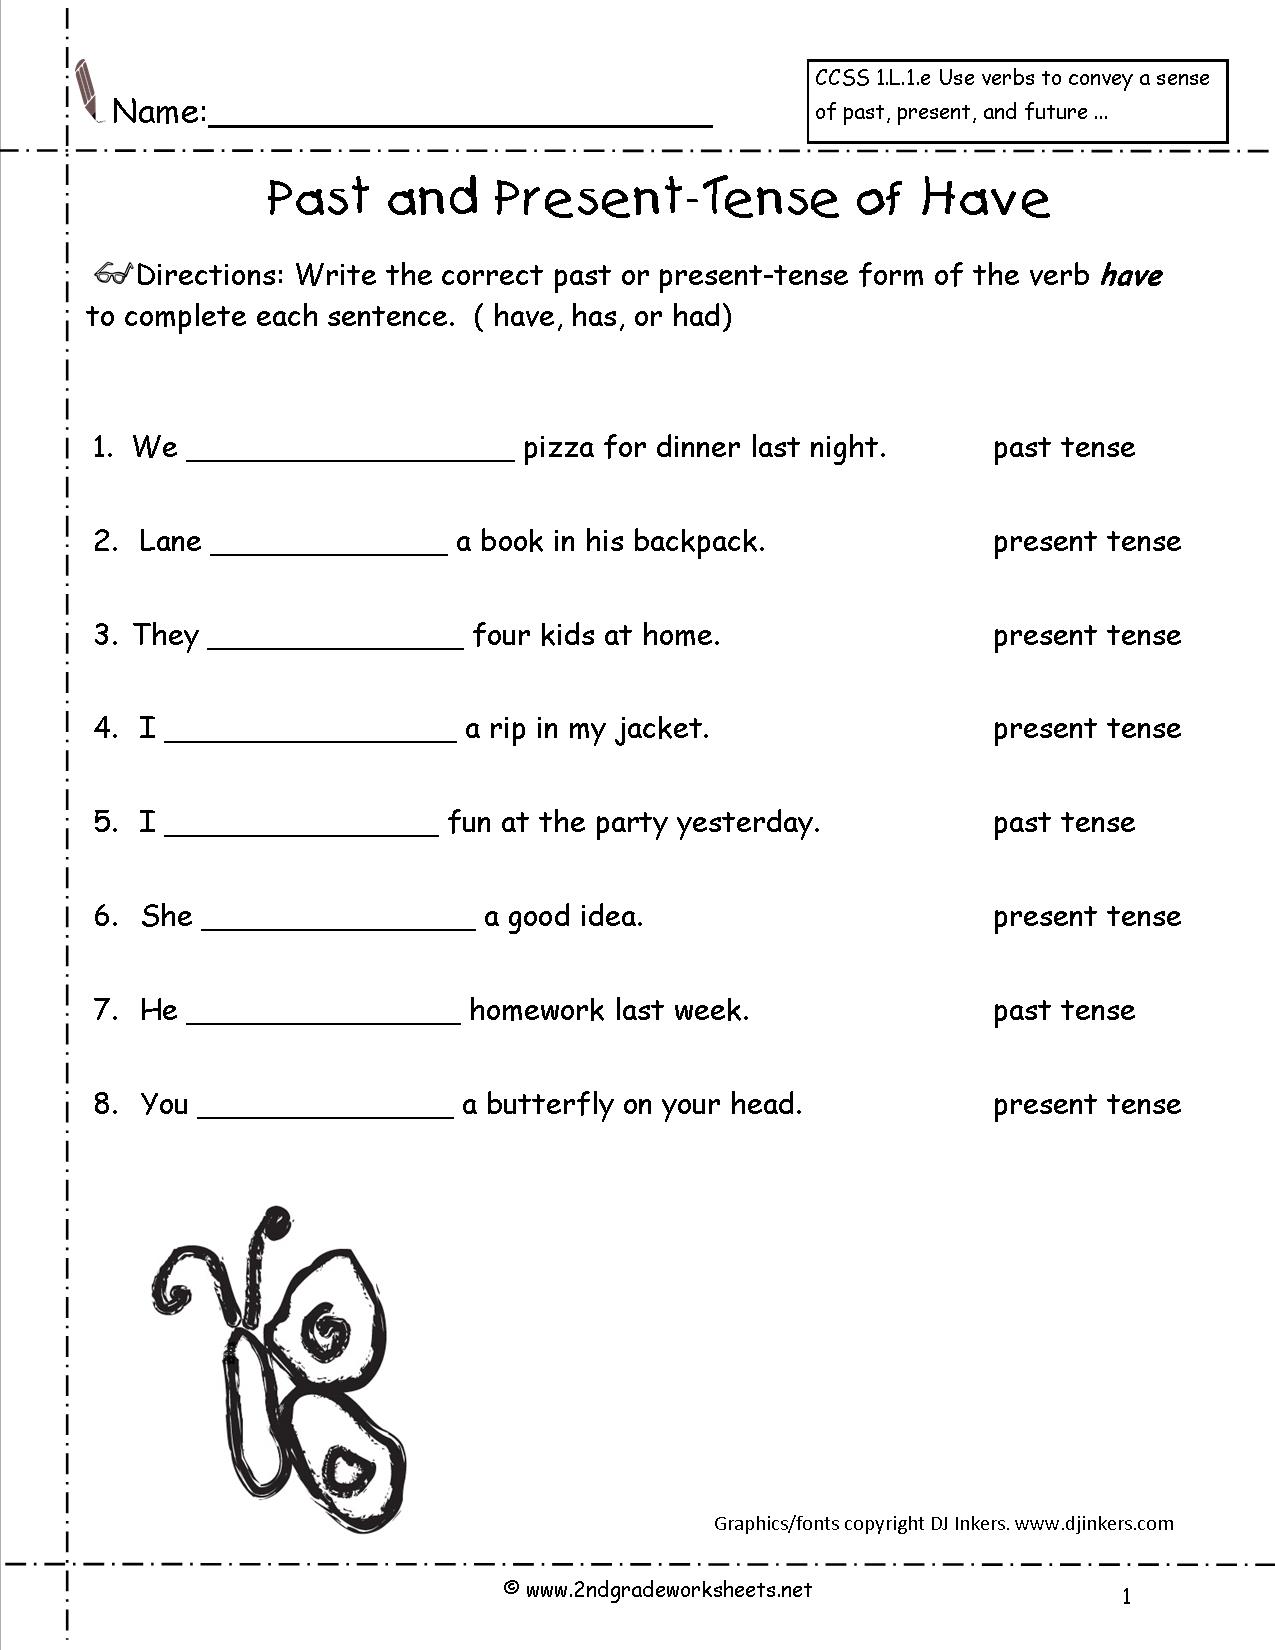 19-best-images-of-past-tense-verbs-worksheets-2nd-grade-cutting-past-tense-verbs-worksheets